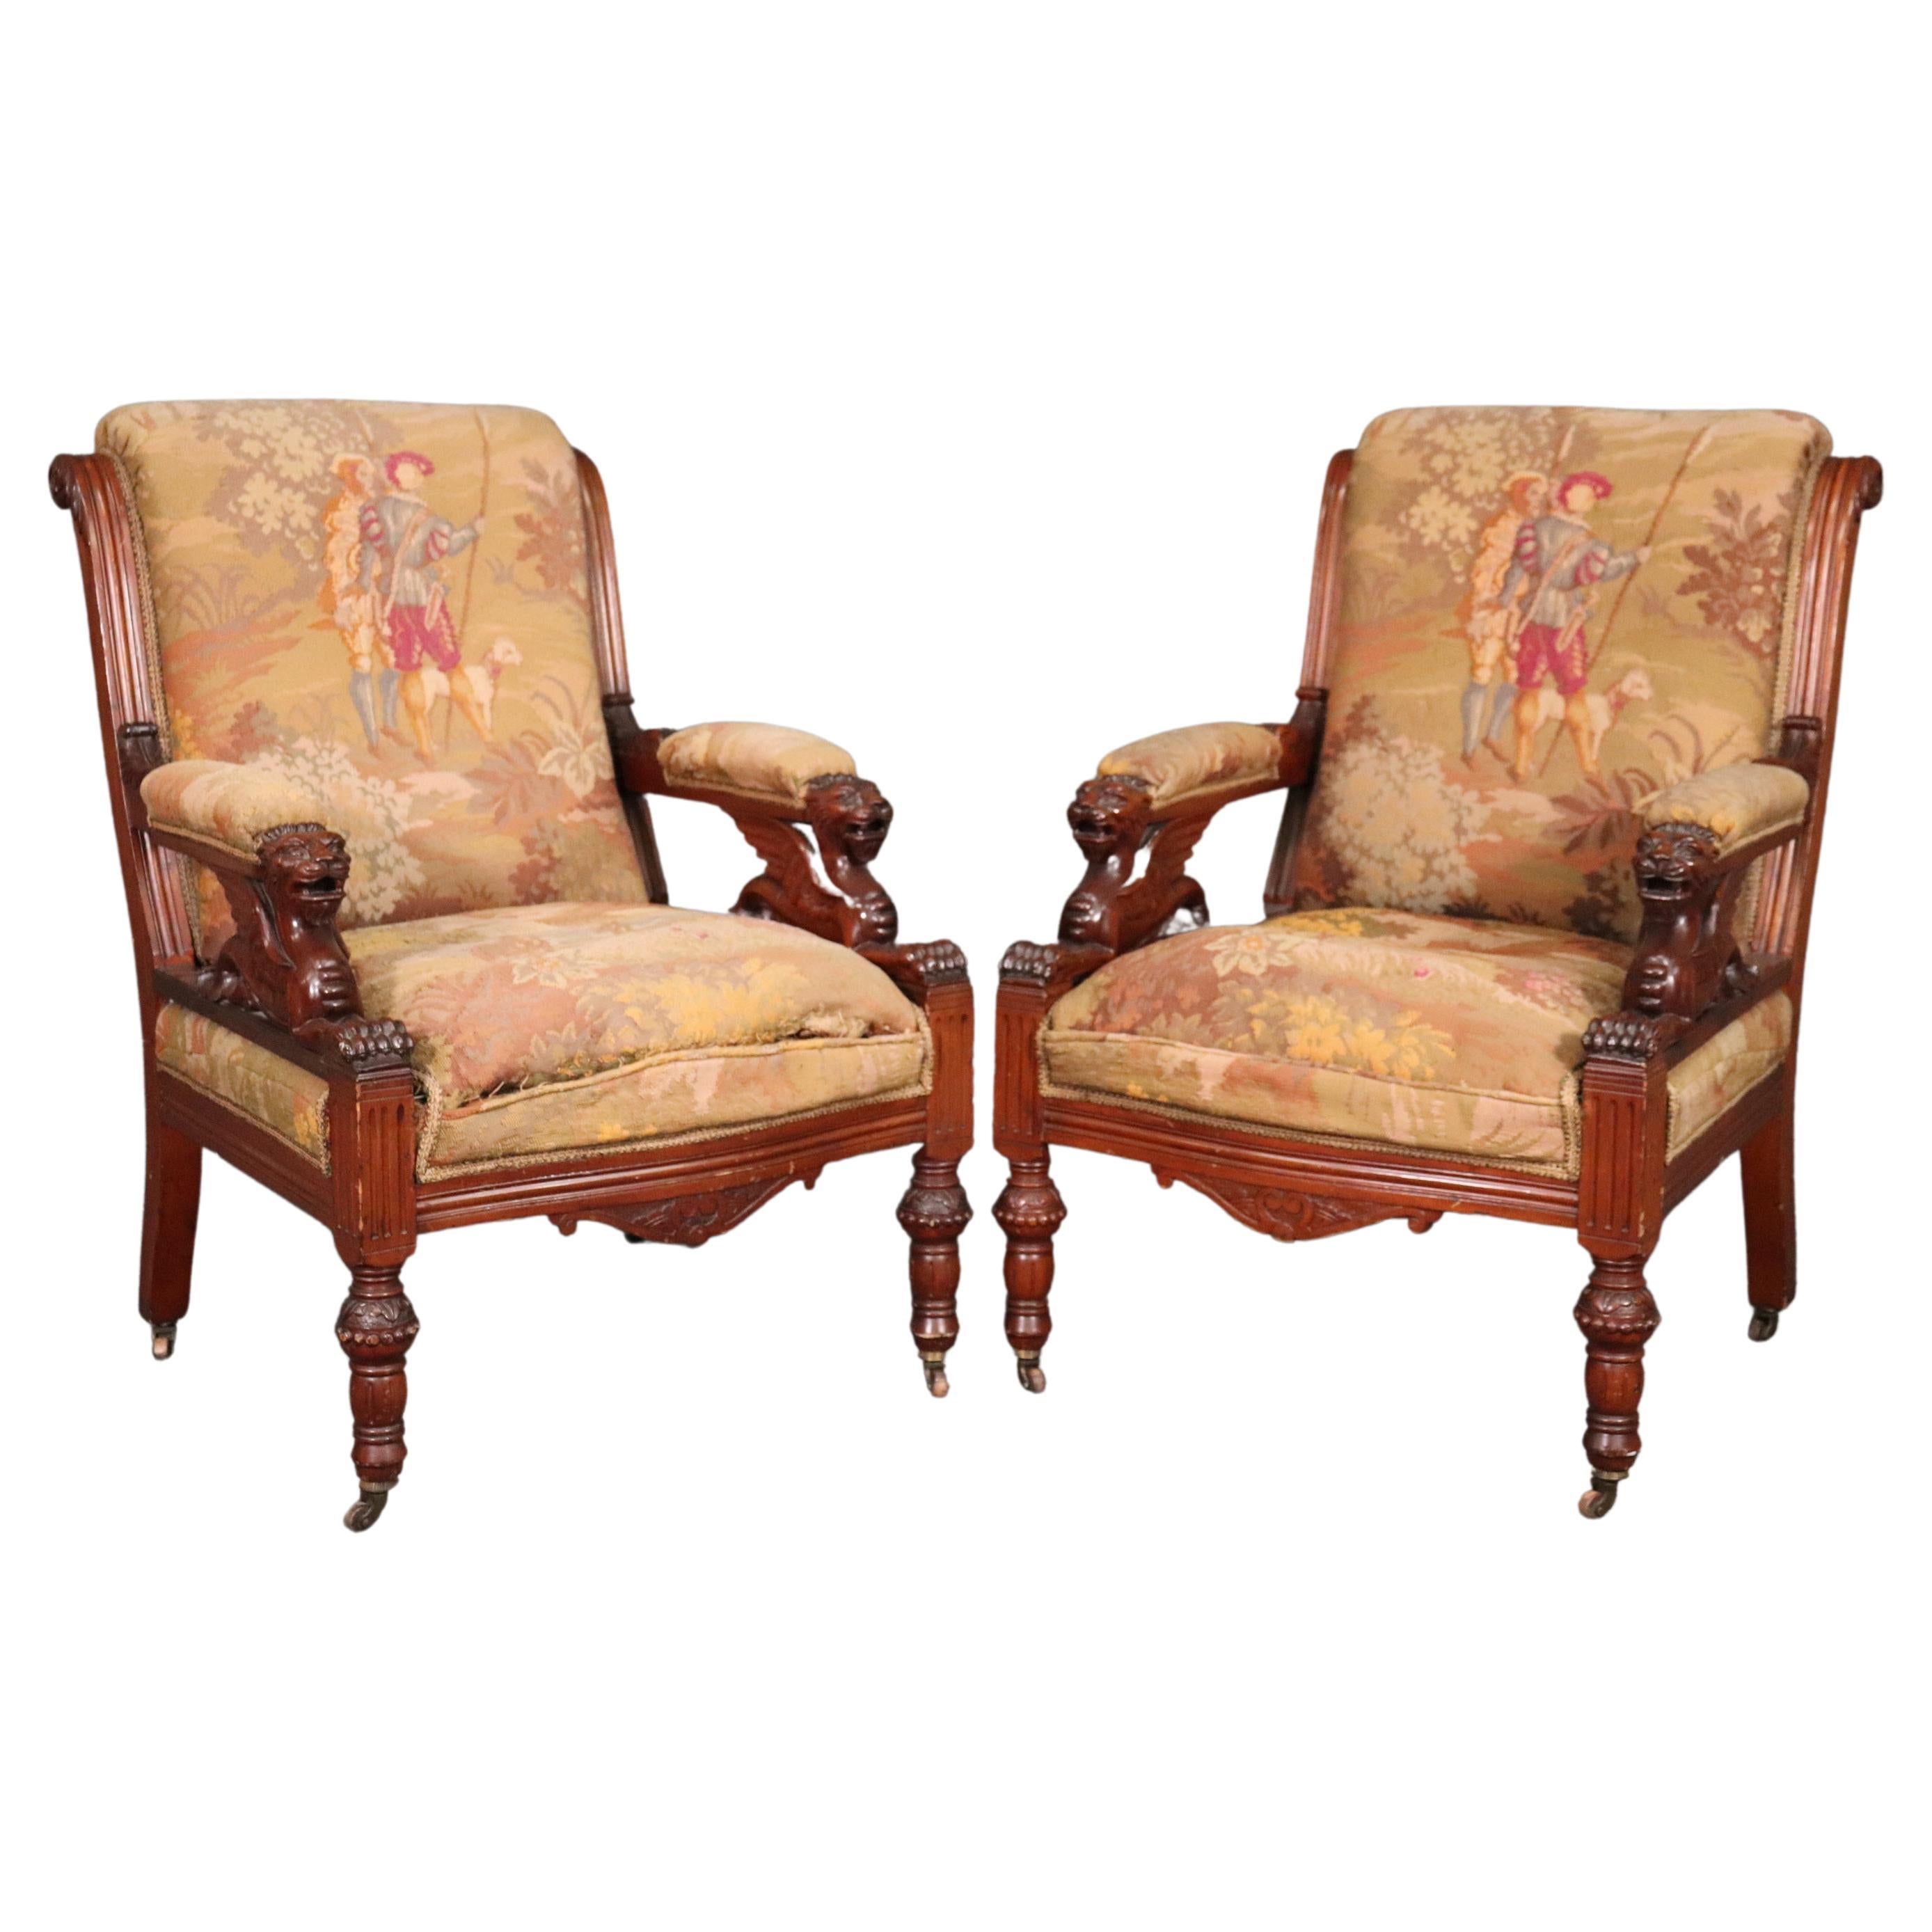 Matched Pair RJ Horner Carved Walnut Griffin Club Parlor Chairs, circa 1870